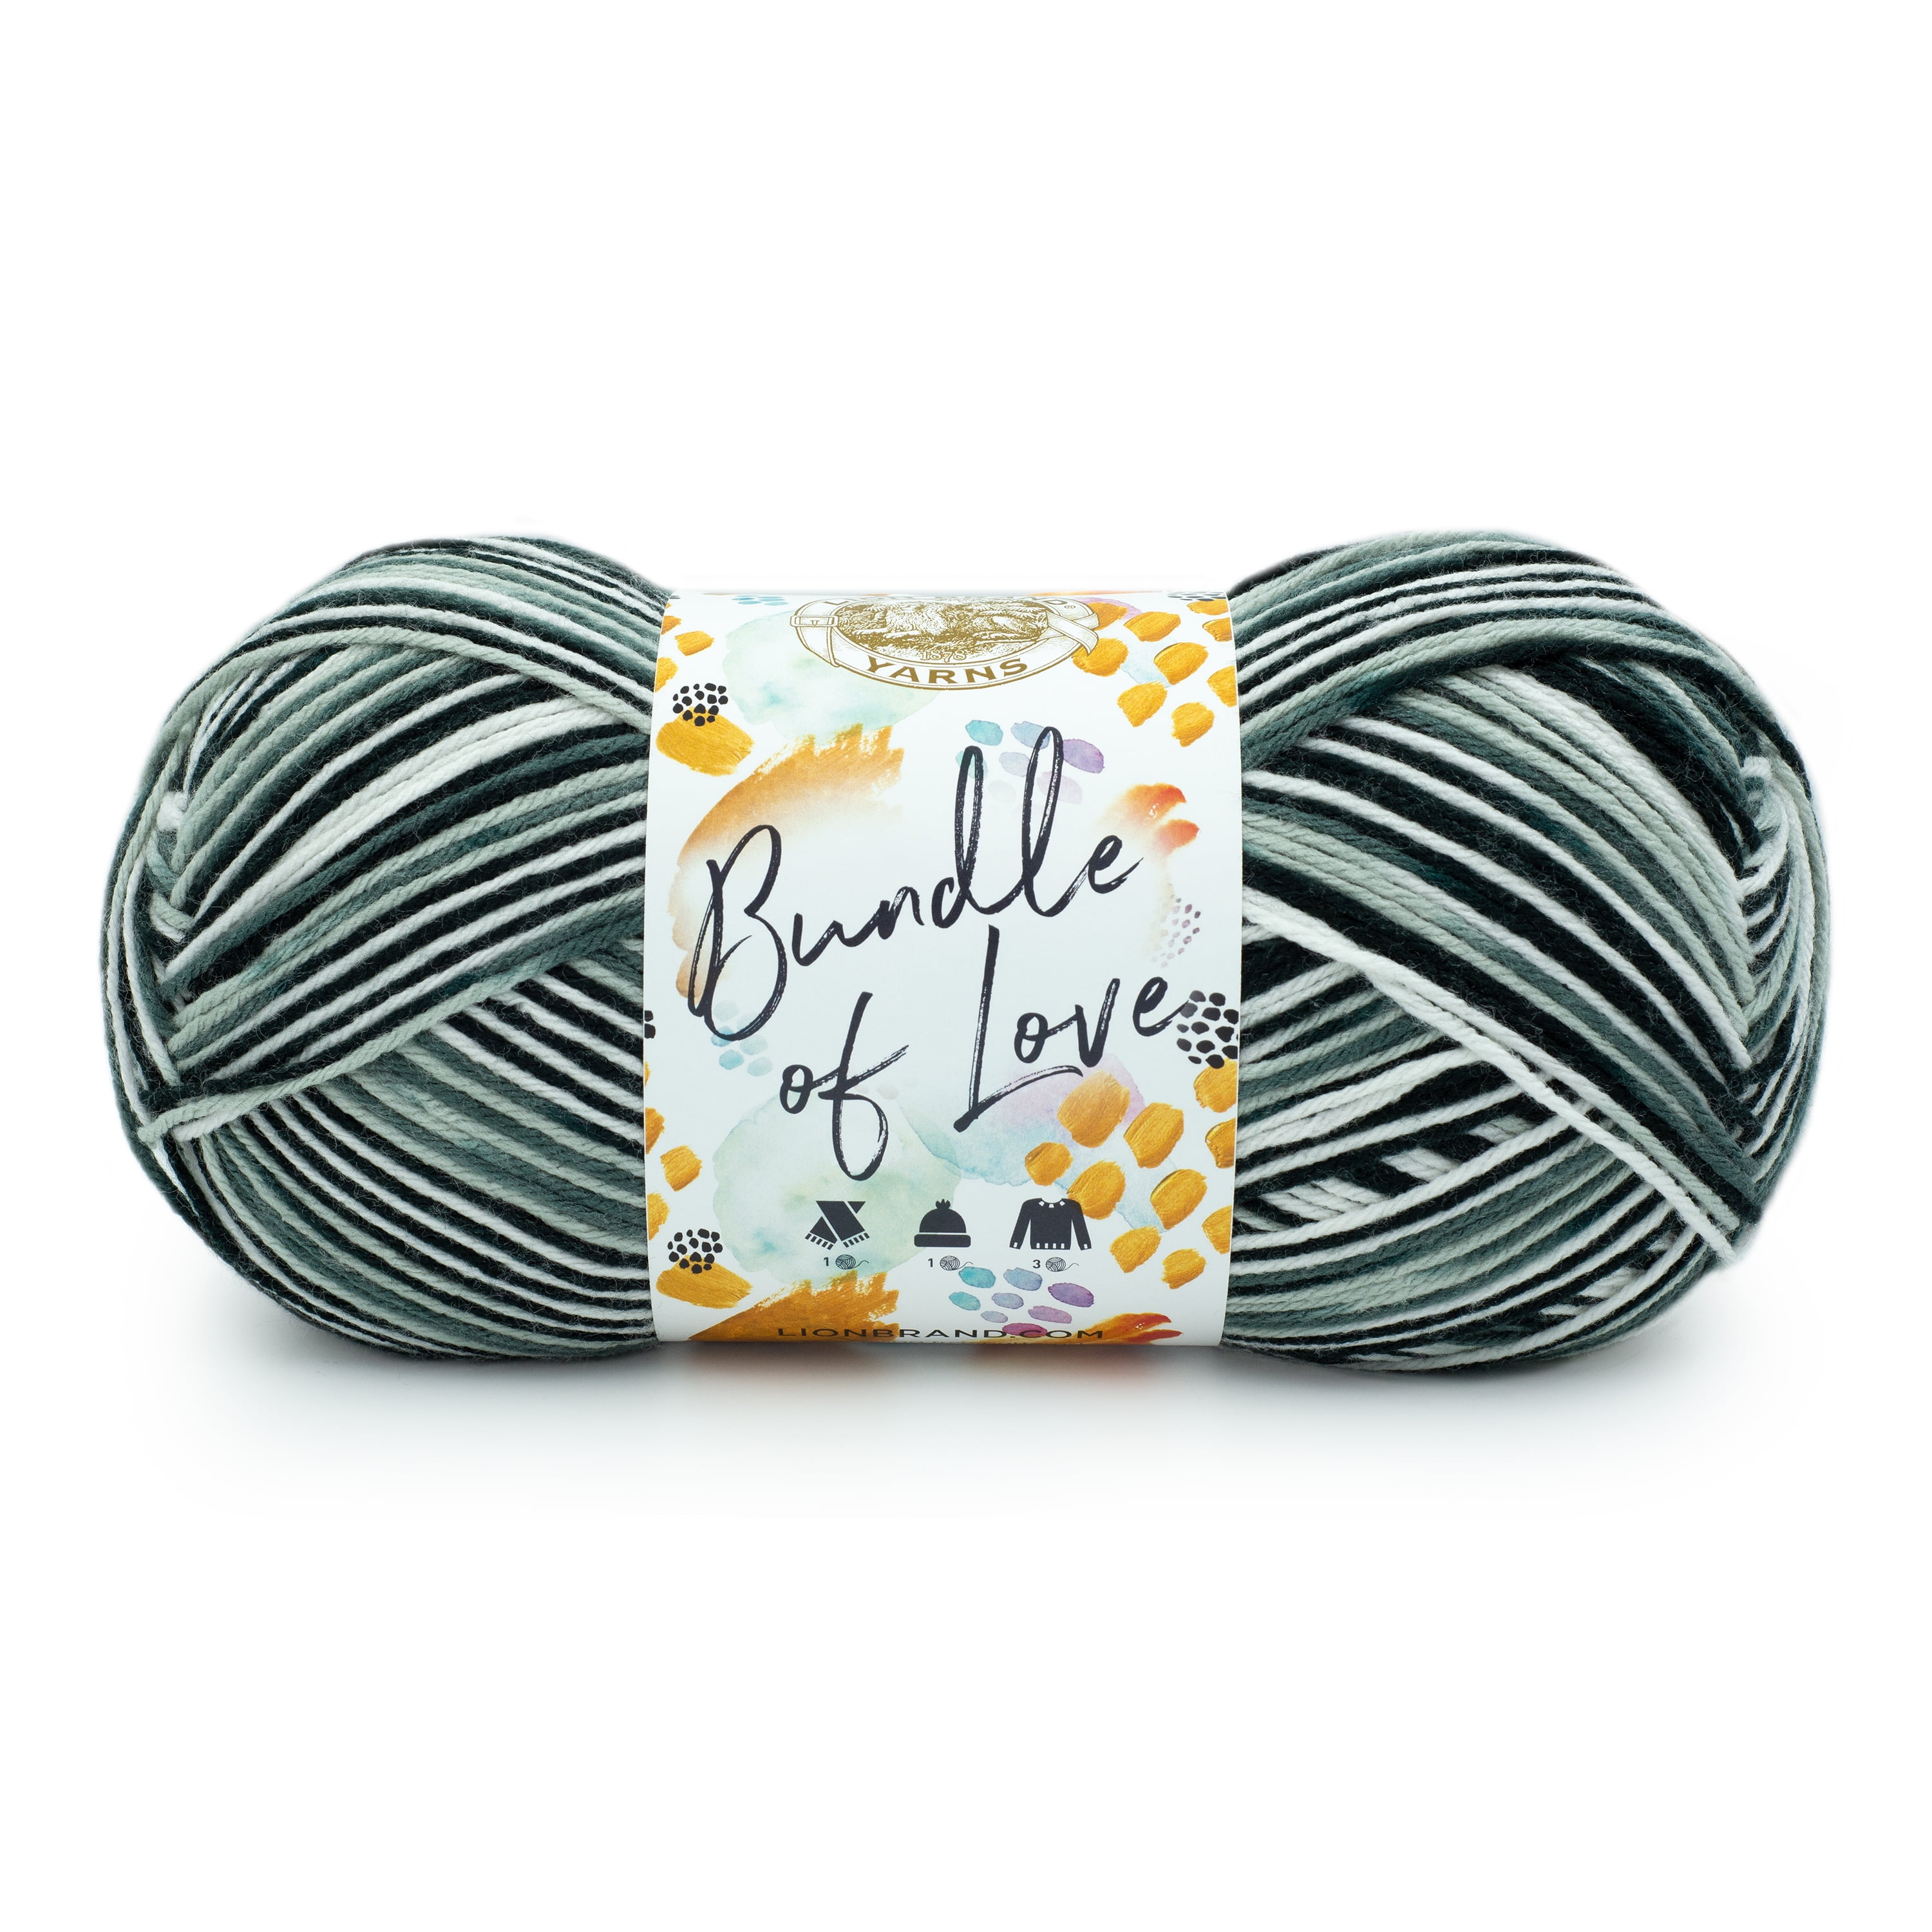 Get the Best Yarn Bundles and Start the Knitting Hobby!